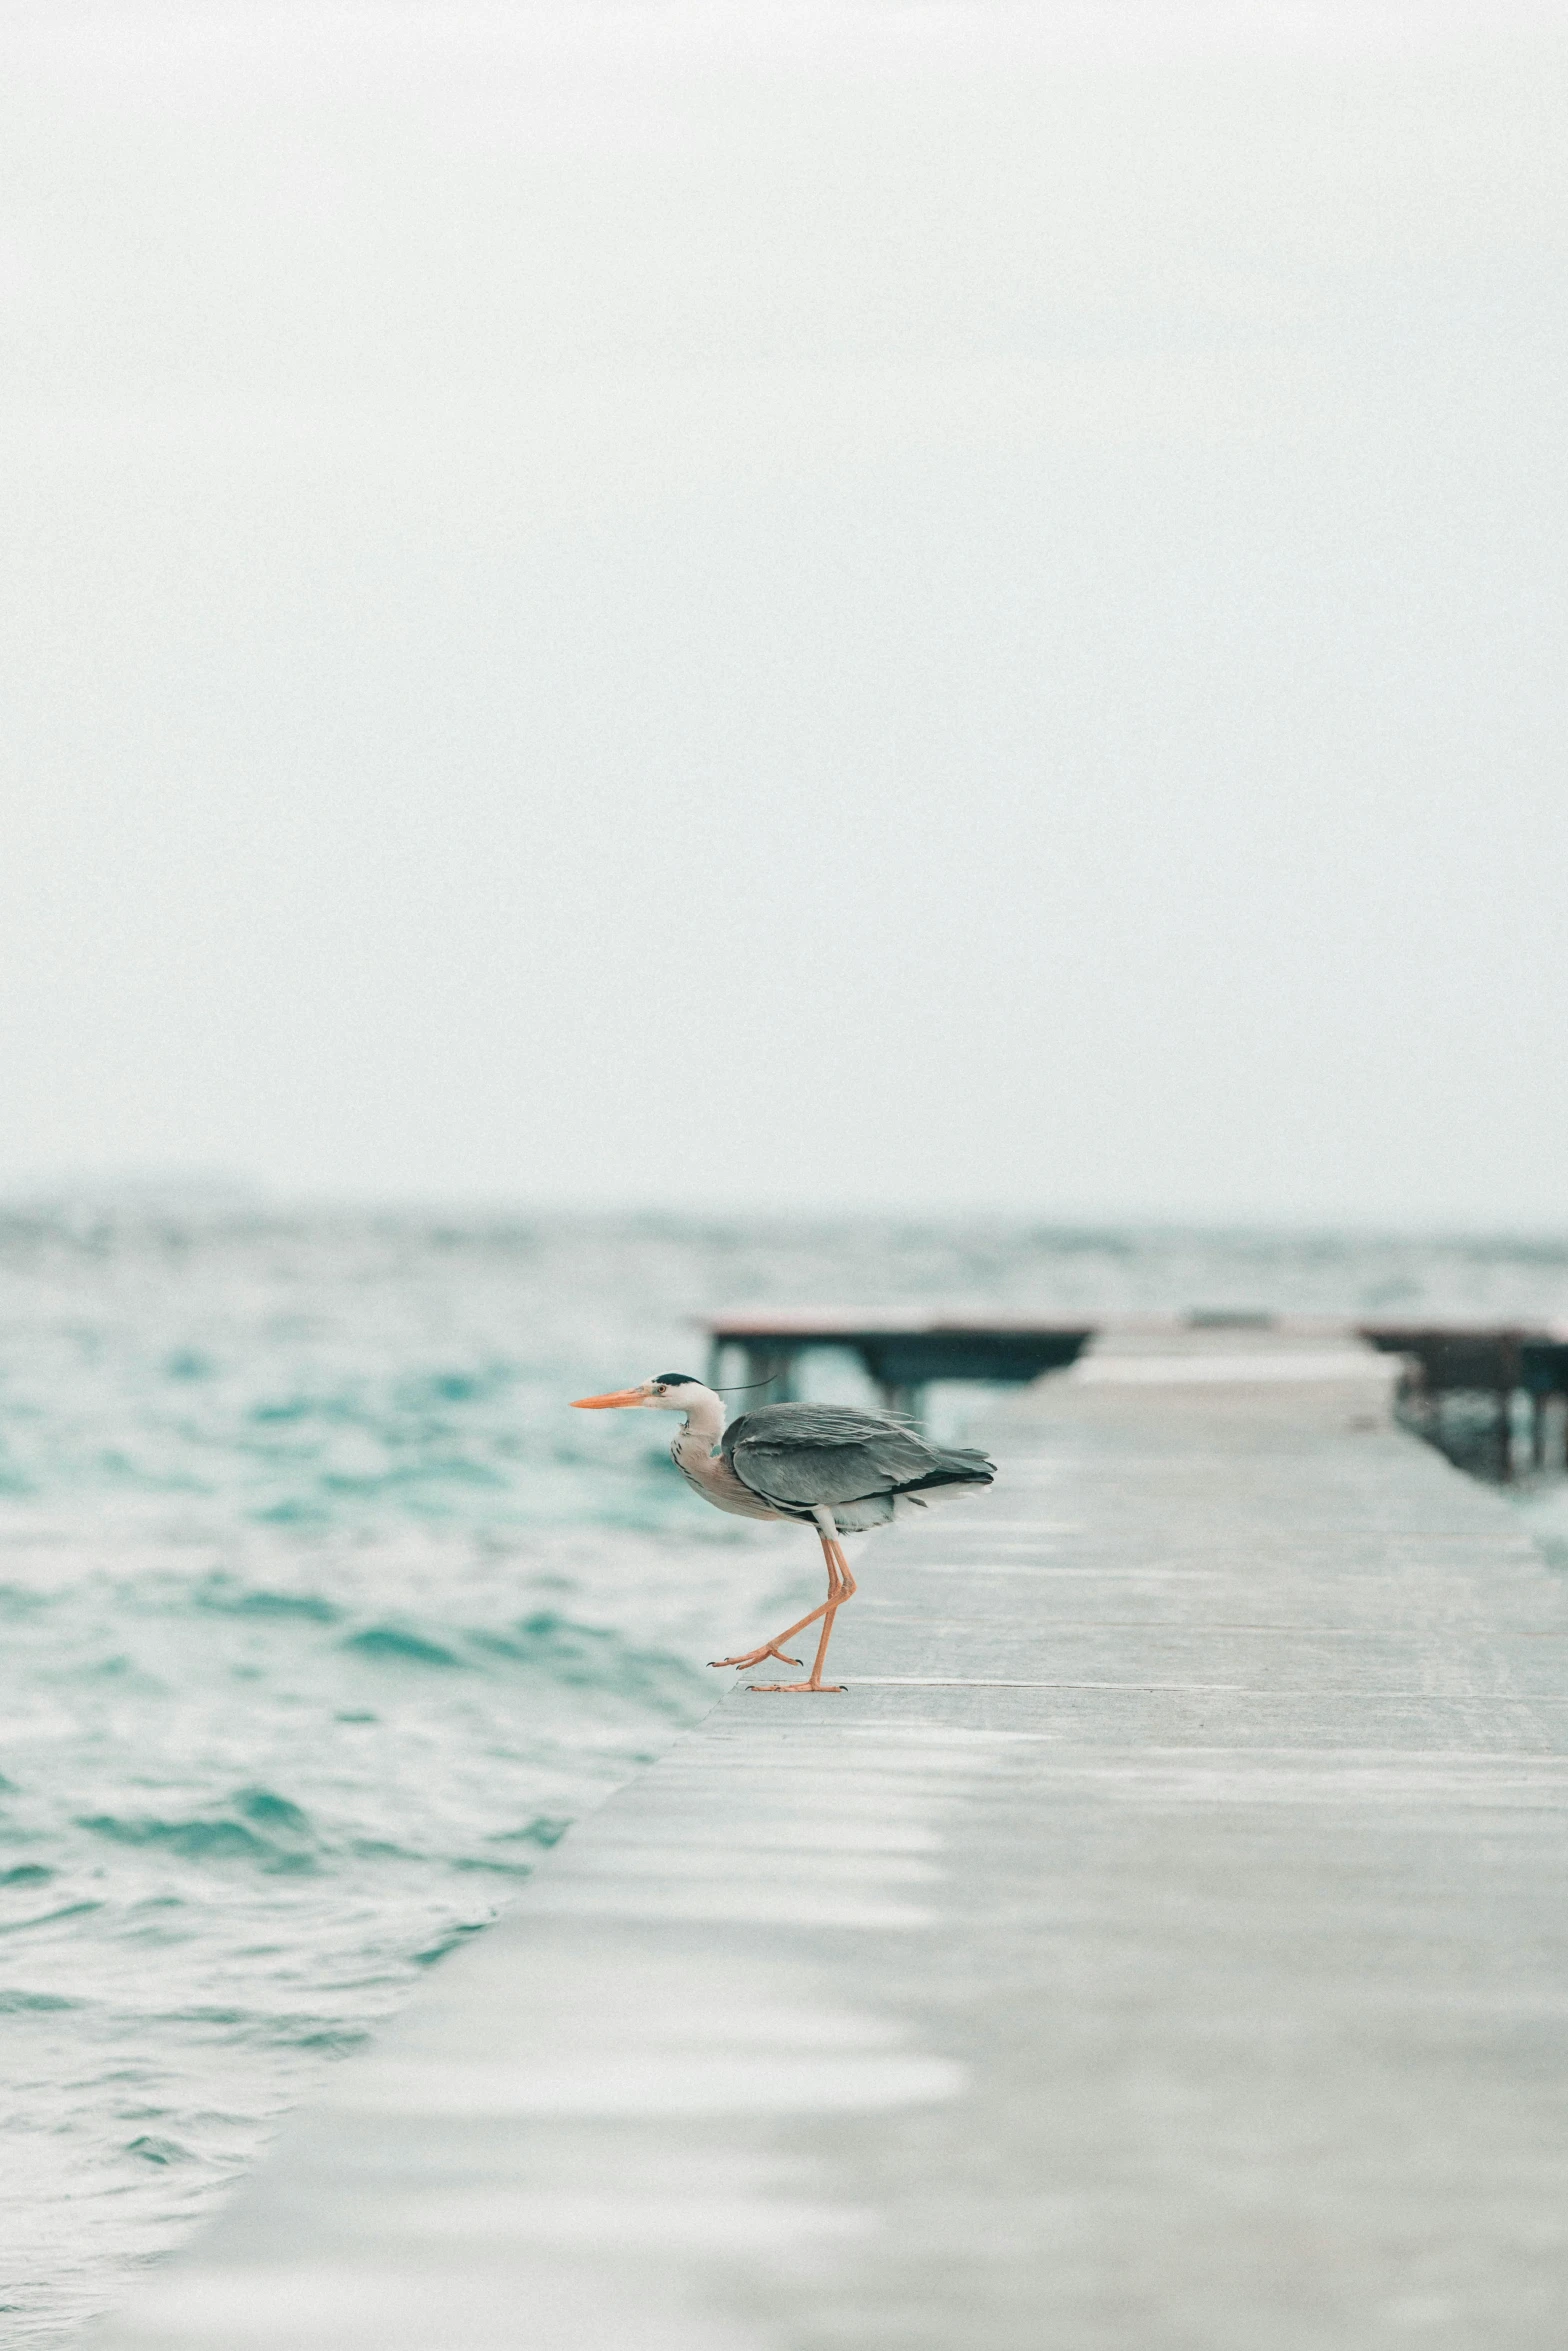 there is a bird standing on a dock by the ocean